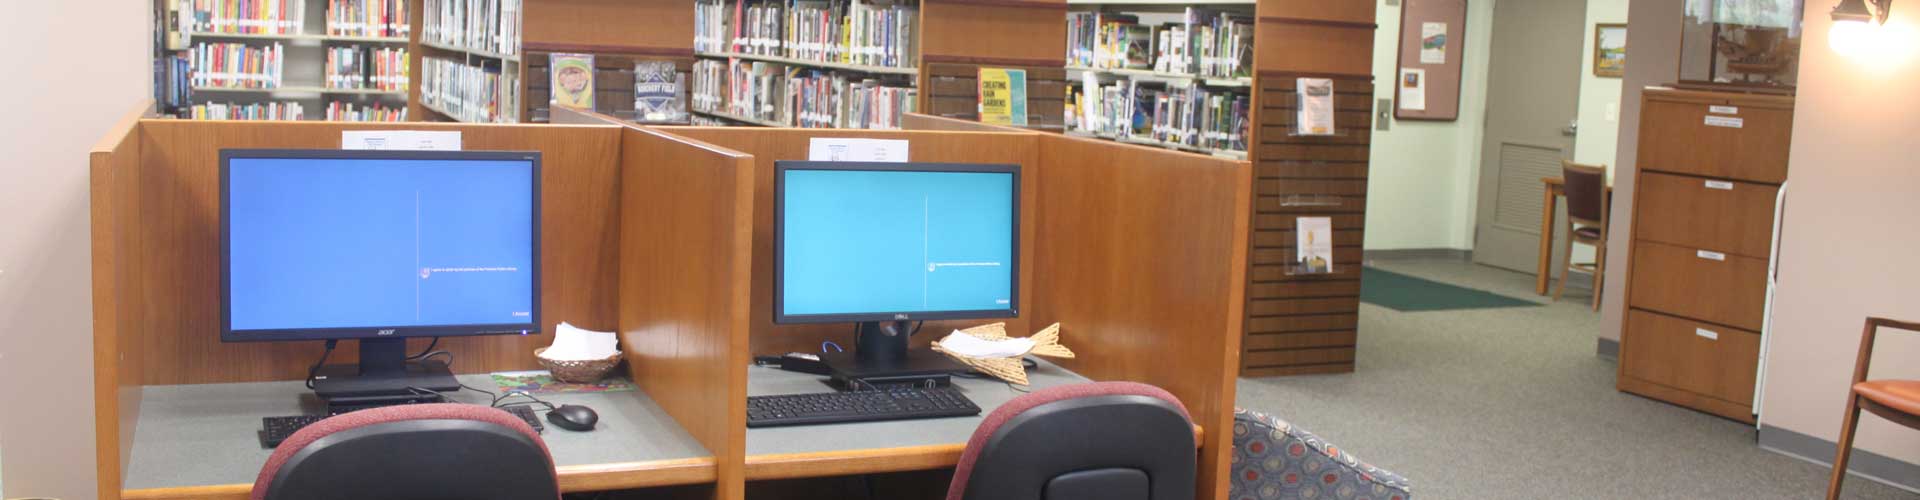 Fontana Public Library Services Showing Computers for Patrons